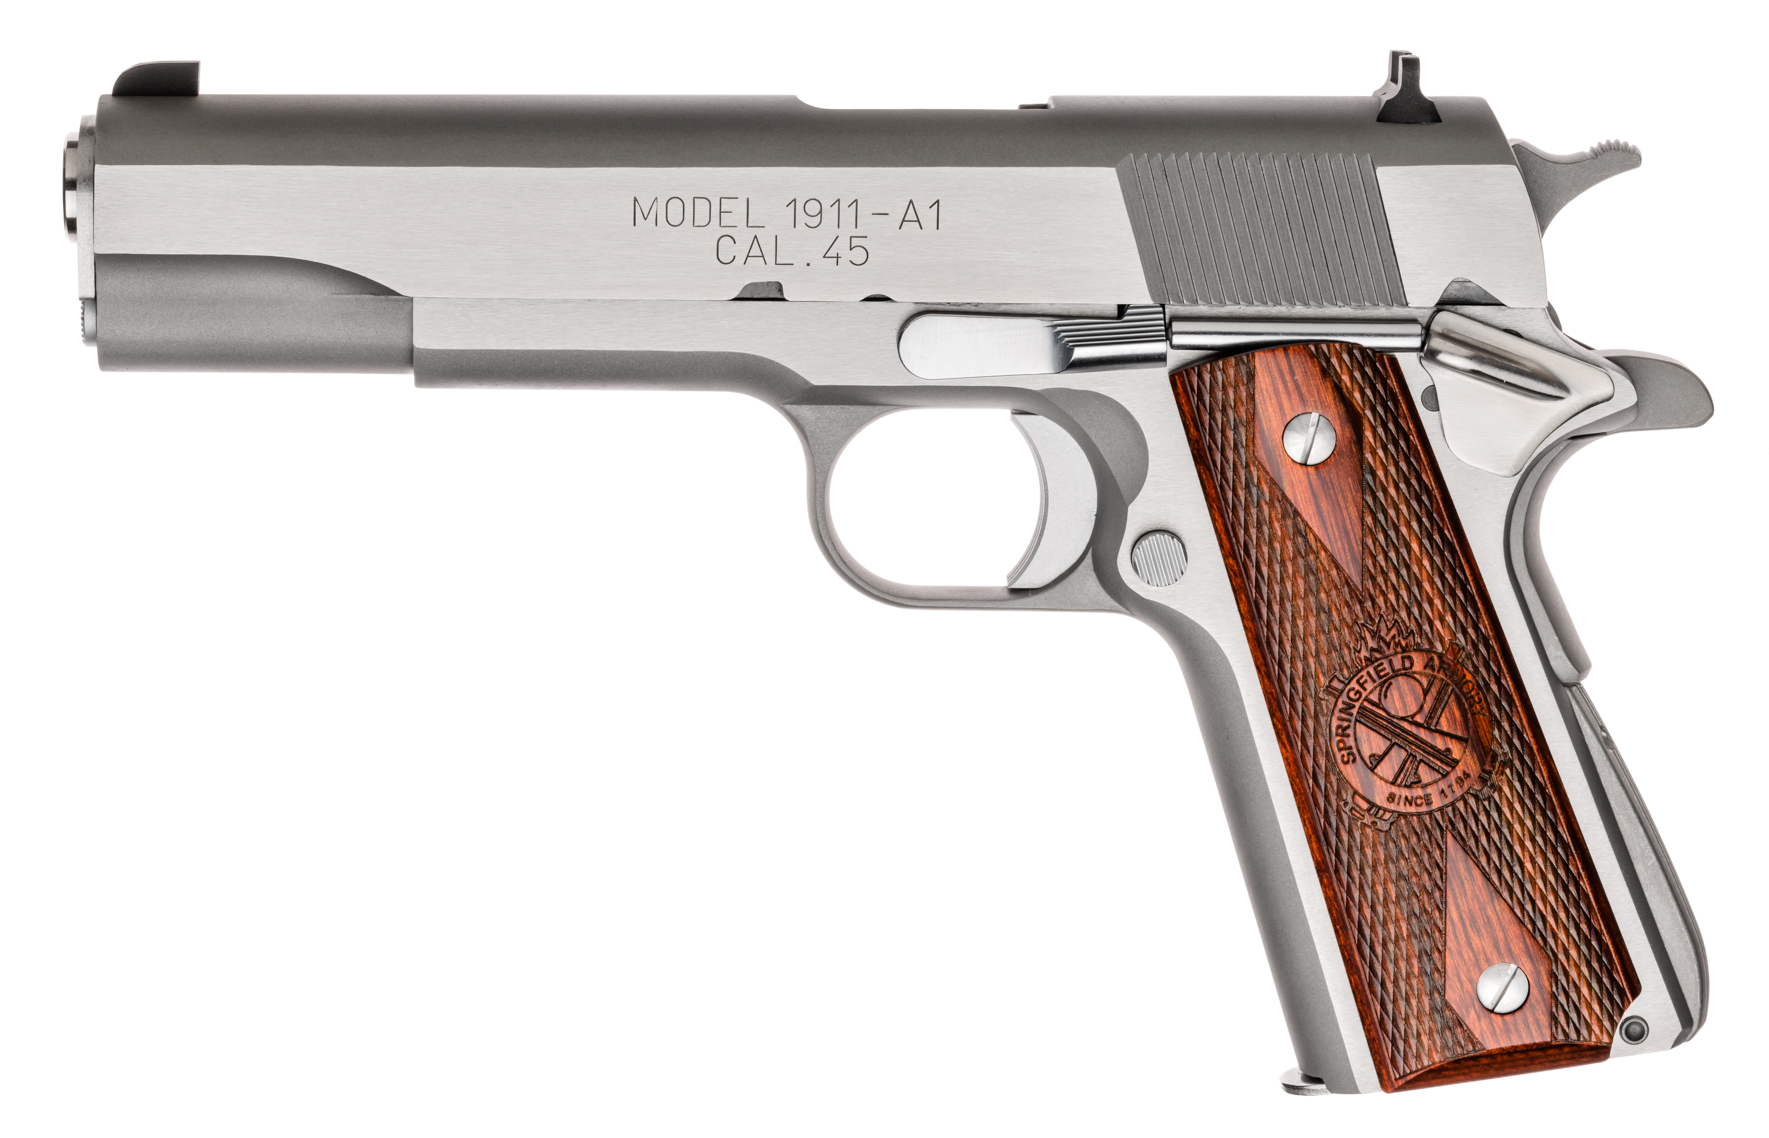 1769x1138 > Springfield Armory 1911 Pistol Wallpapers